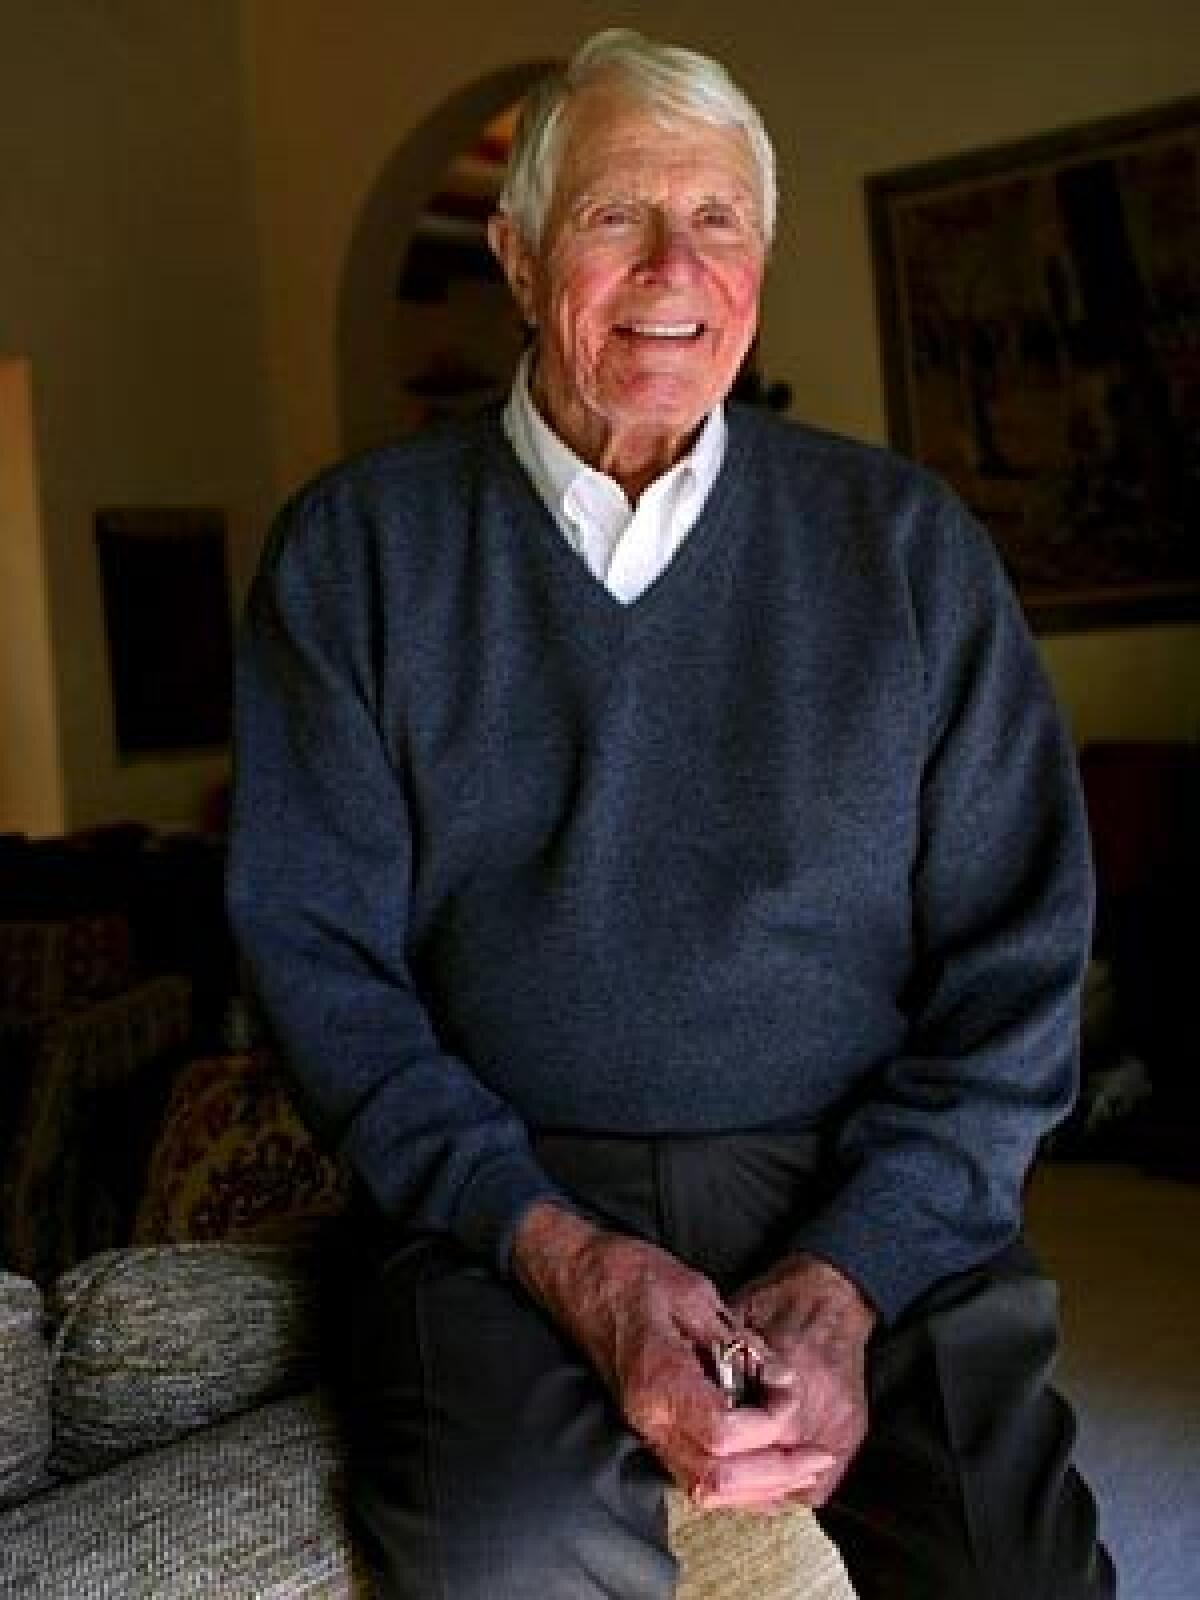 Actor Peter Graves received a lifetime achievement award last month at the Ojai Film Festival.